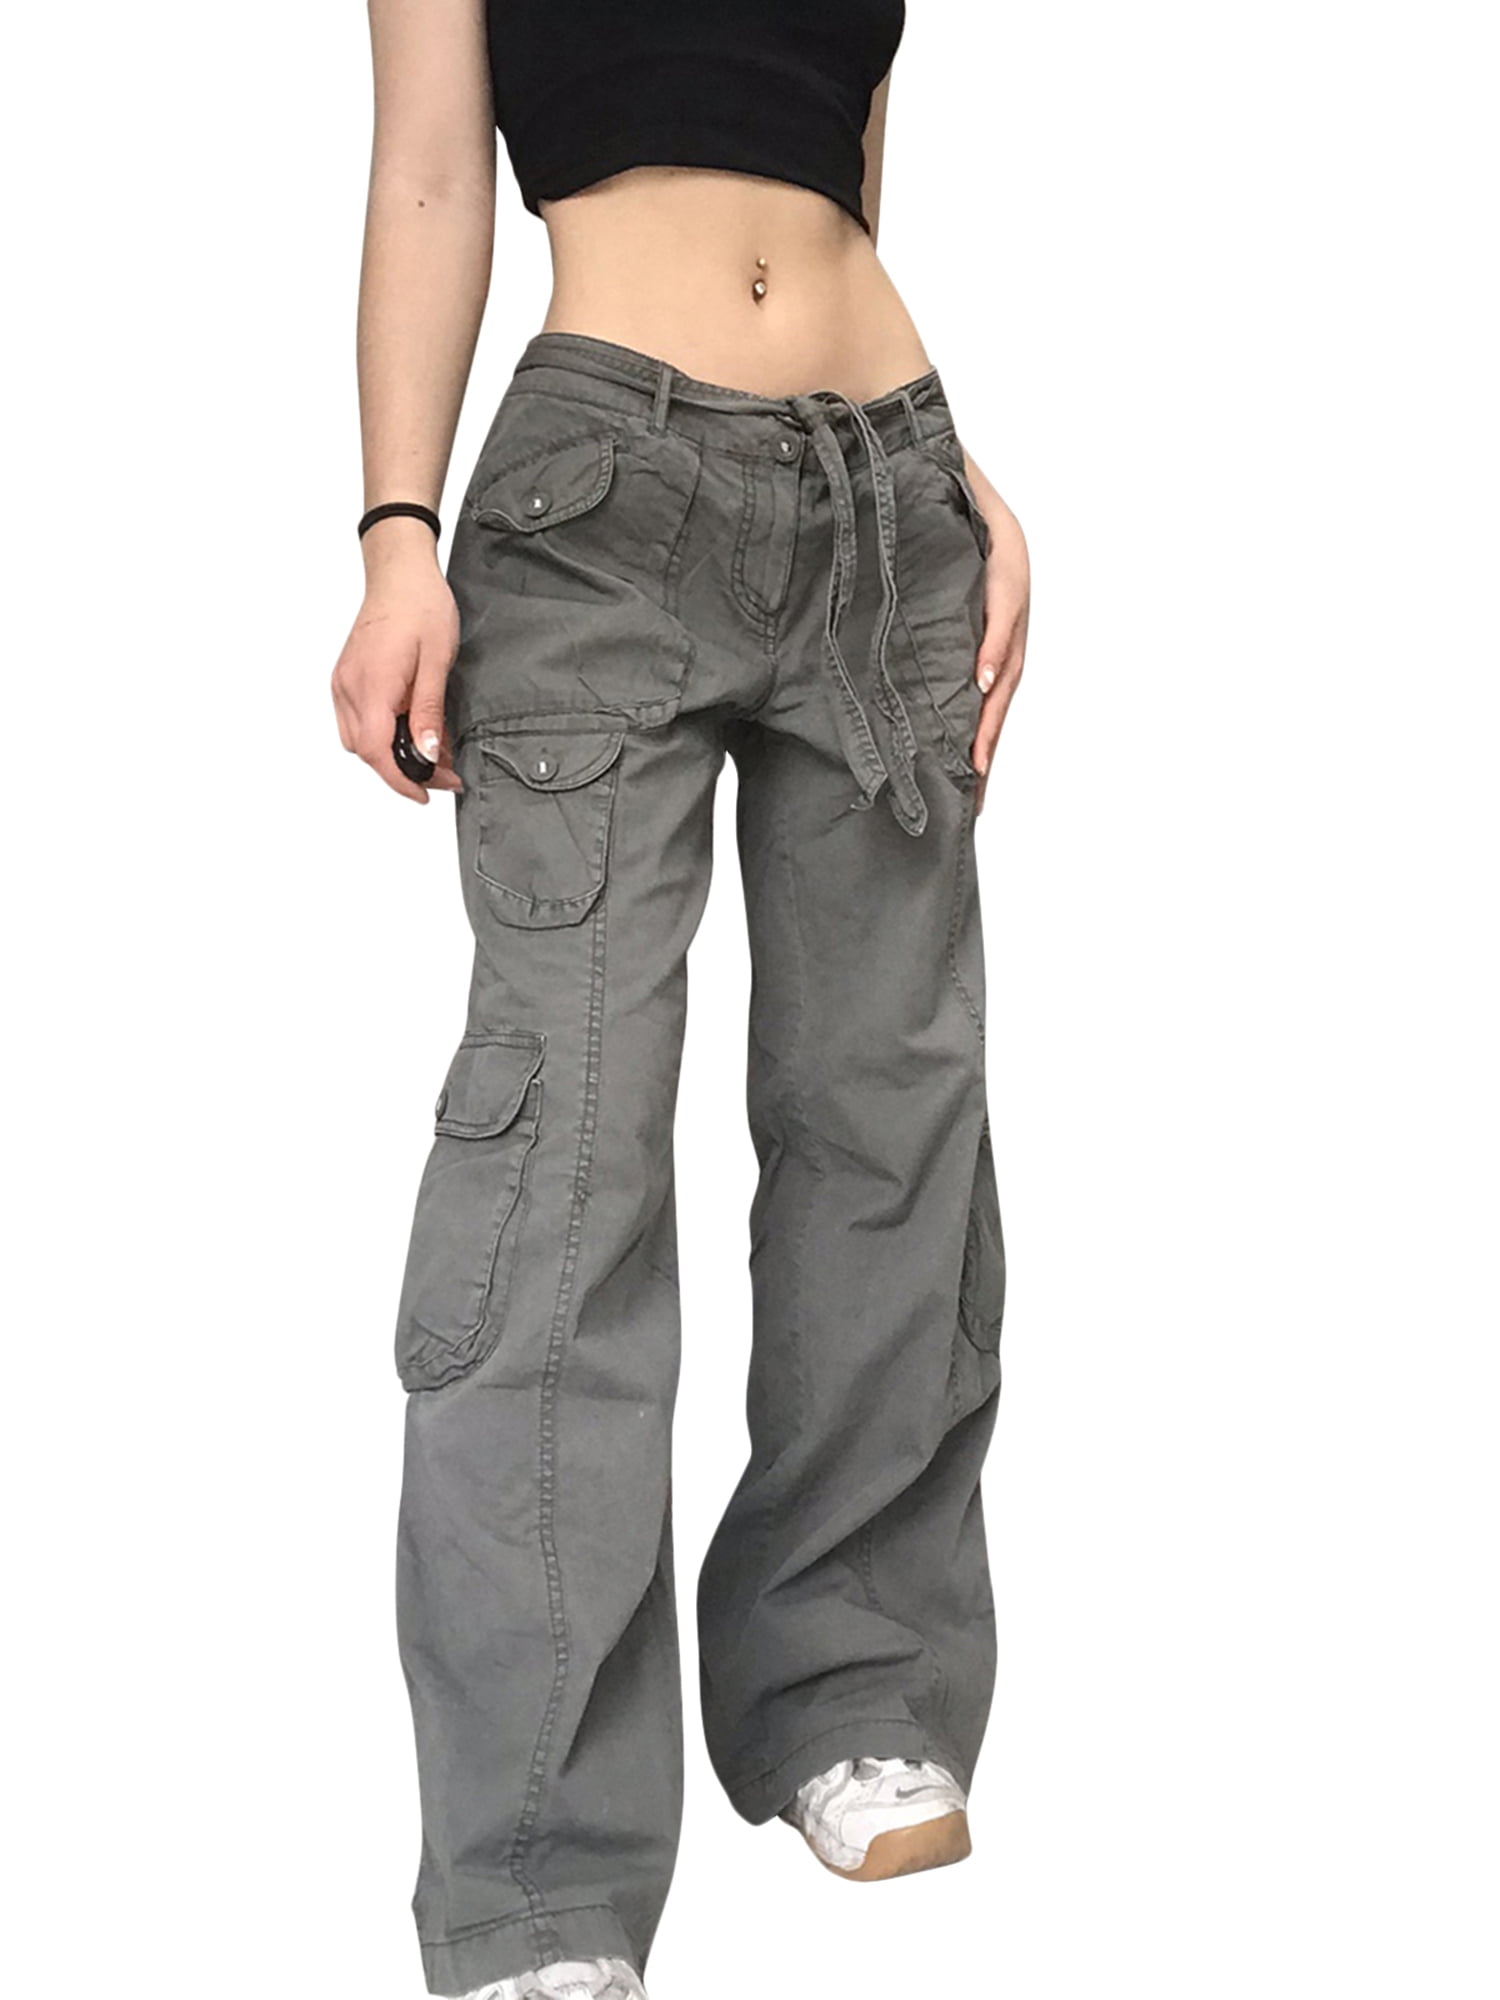 MEN FASHION Trousers Wide-leg Selected Cargo trousers discount 62% Gray L 